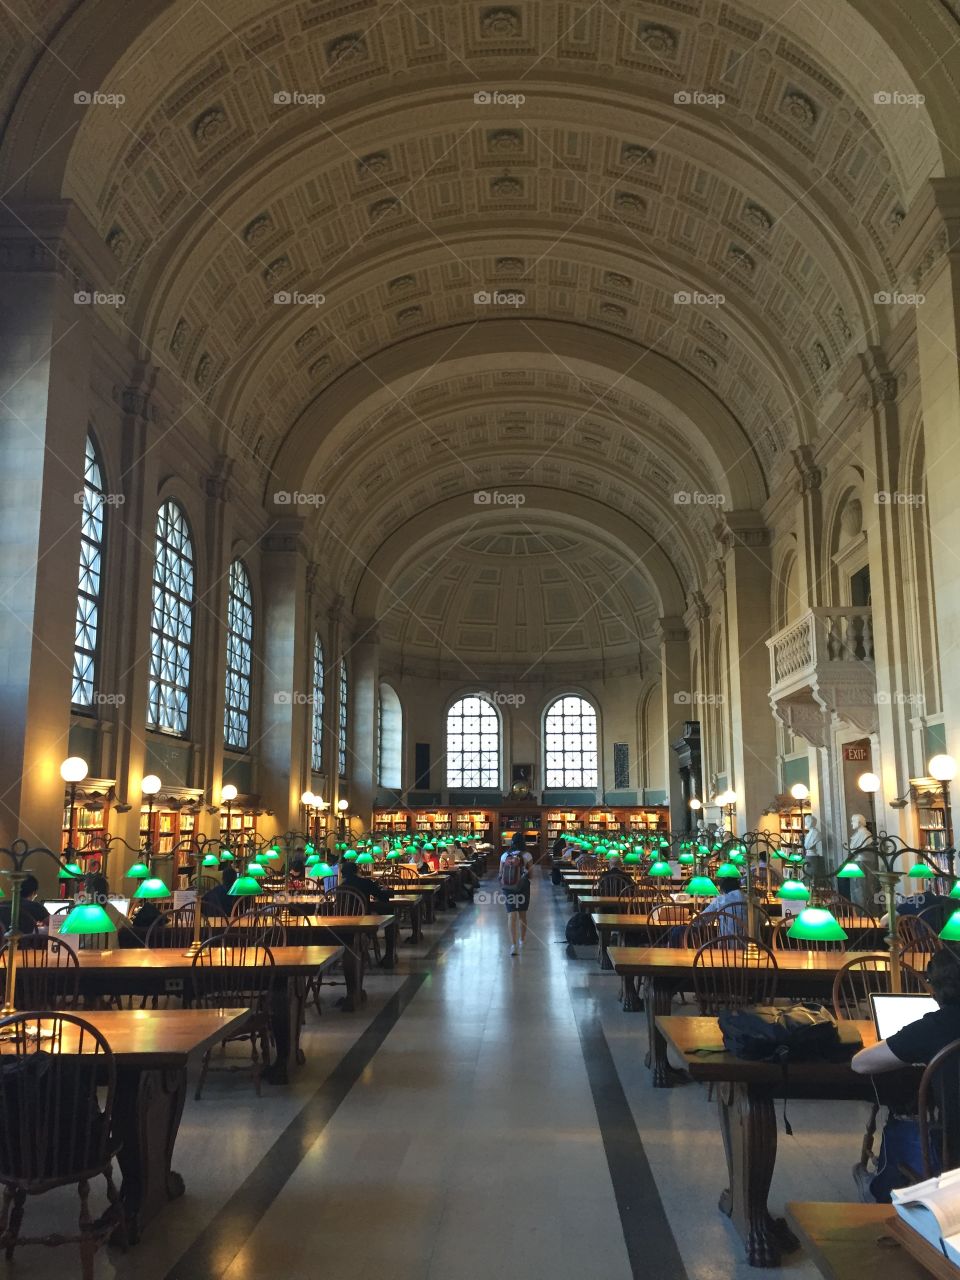 Library in Boston 